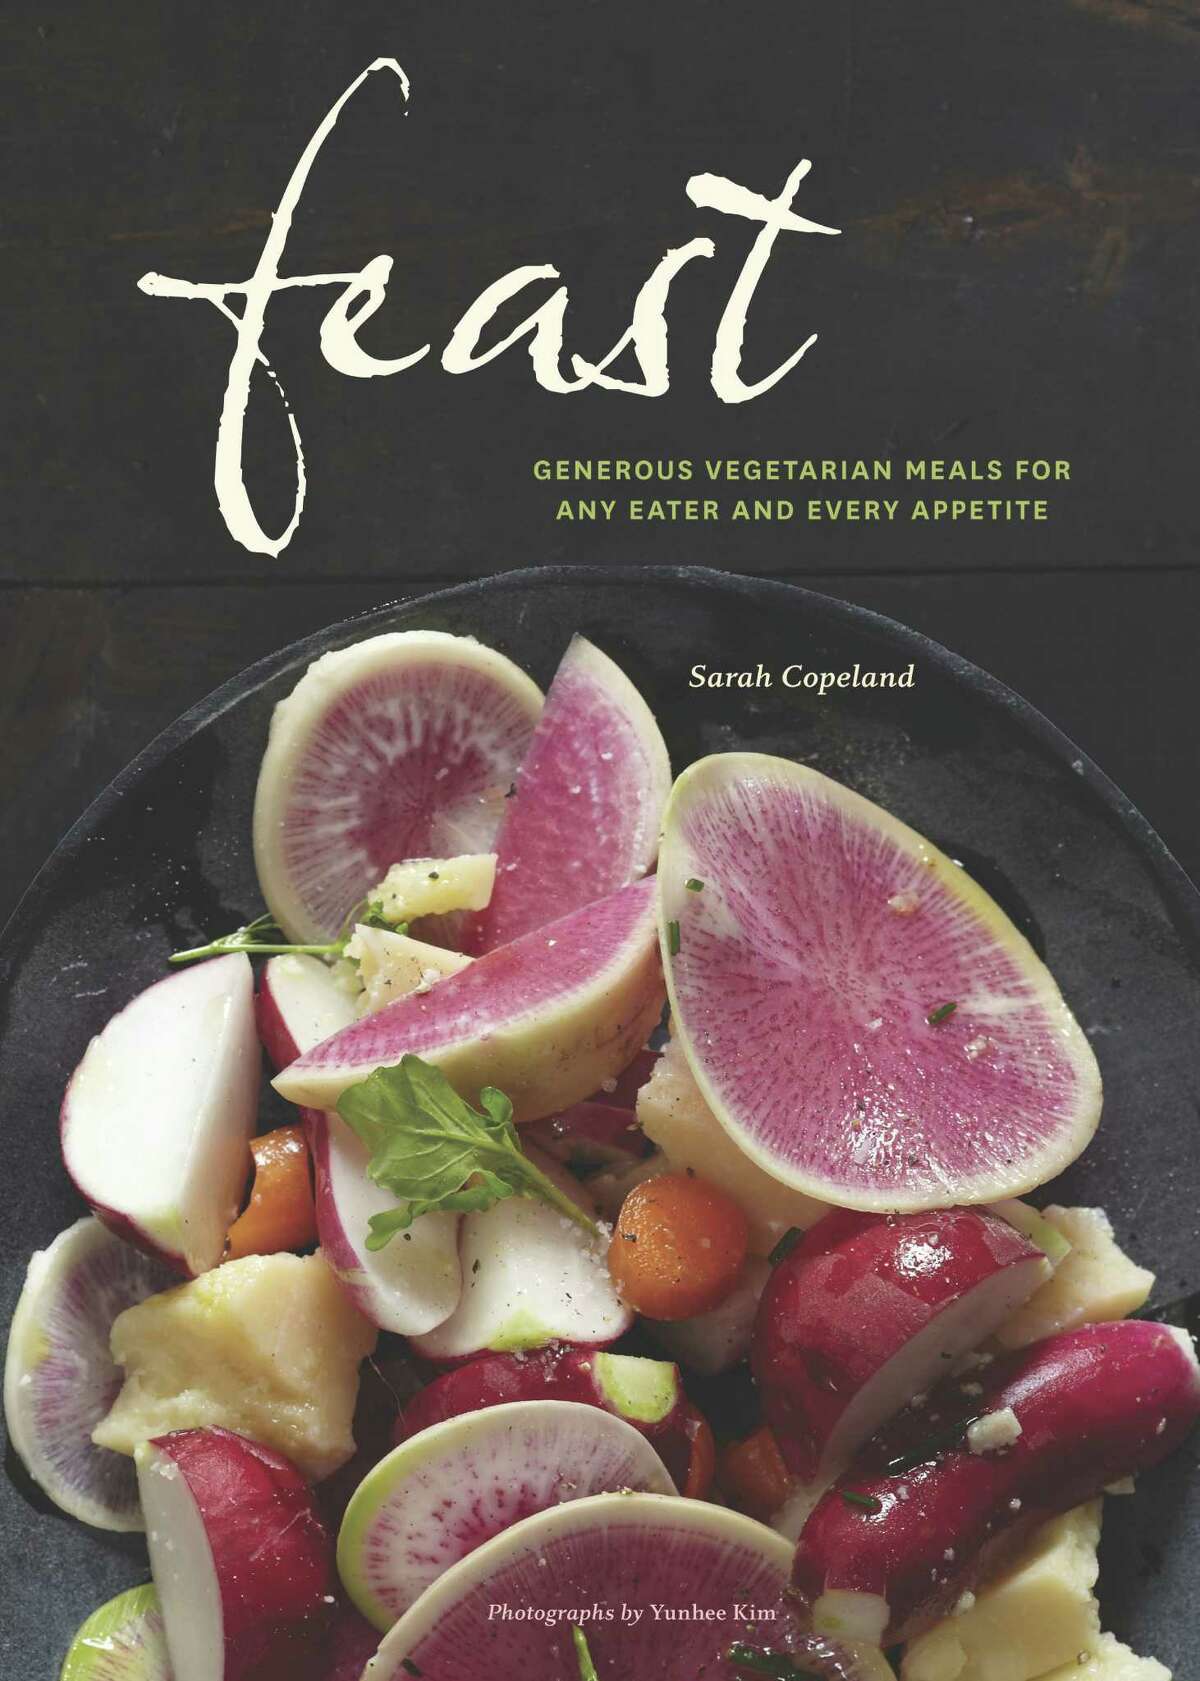 Cover of "Feast: Generous Vegetarian Meals for Any Eater and Every Appetite" by Sarah Copeland (Chronicle Books, $35).